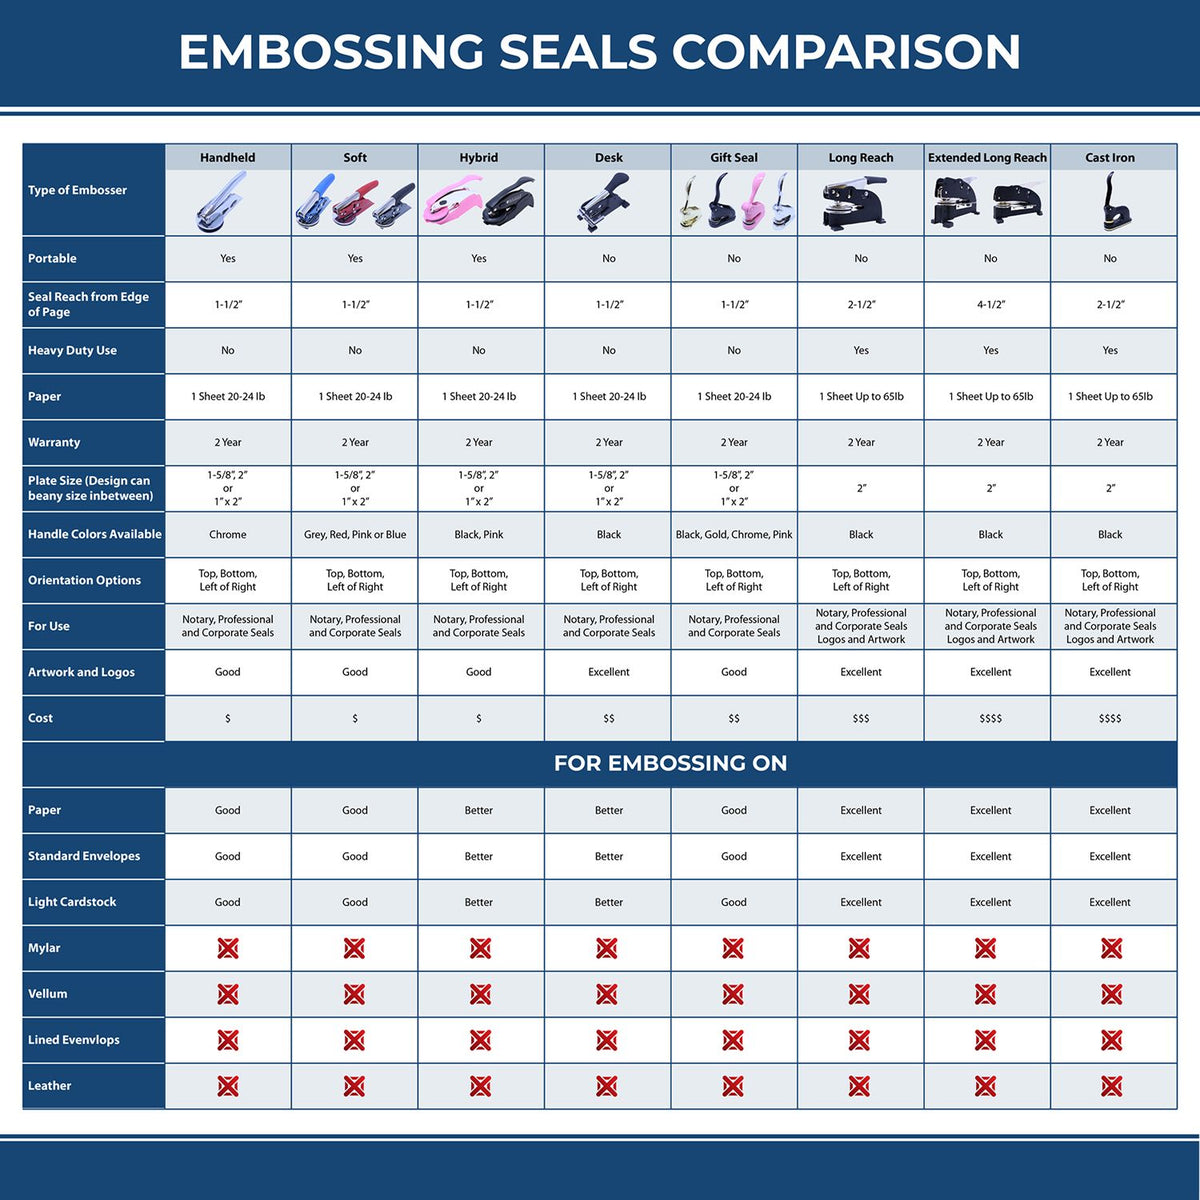 A comparison chart for the different types of mount models available for the Long Reach Wyoming PE Seal.